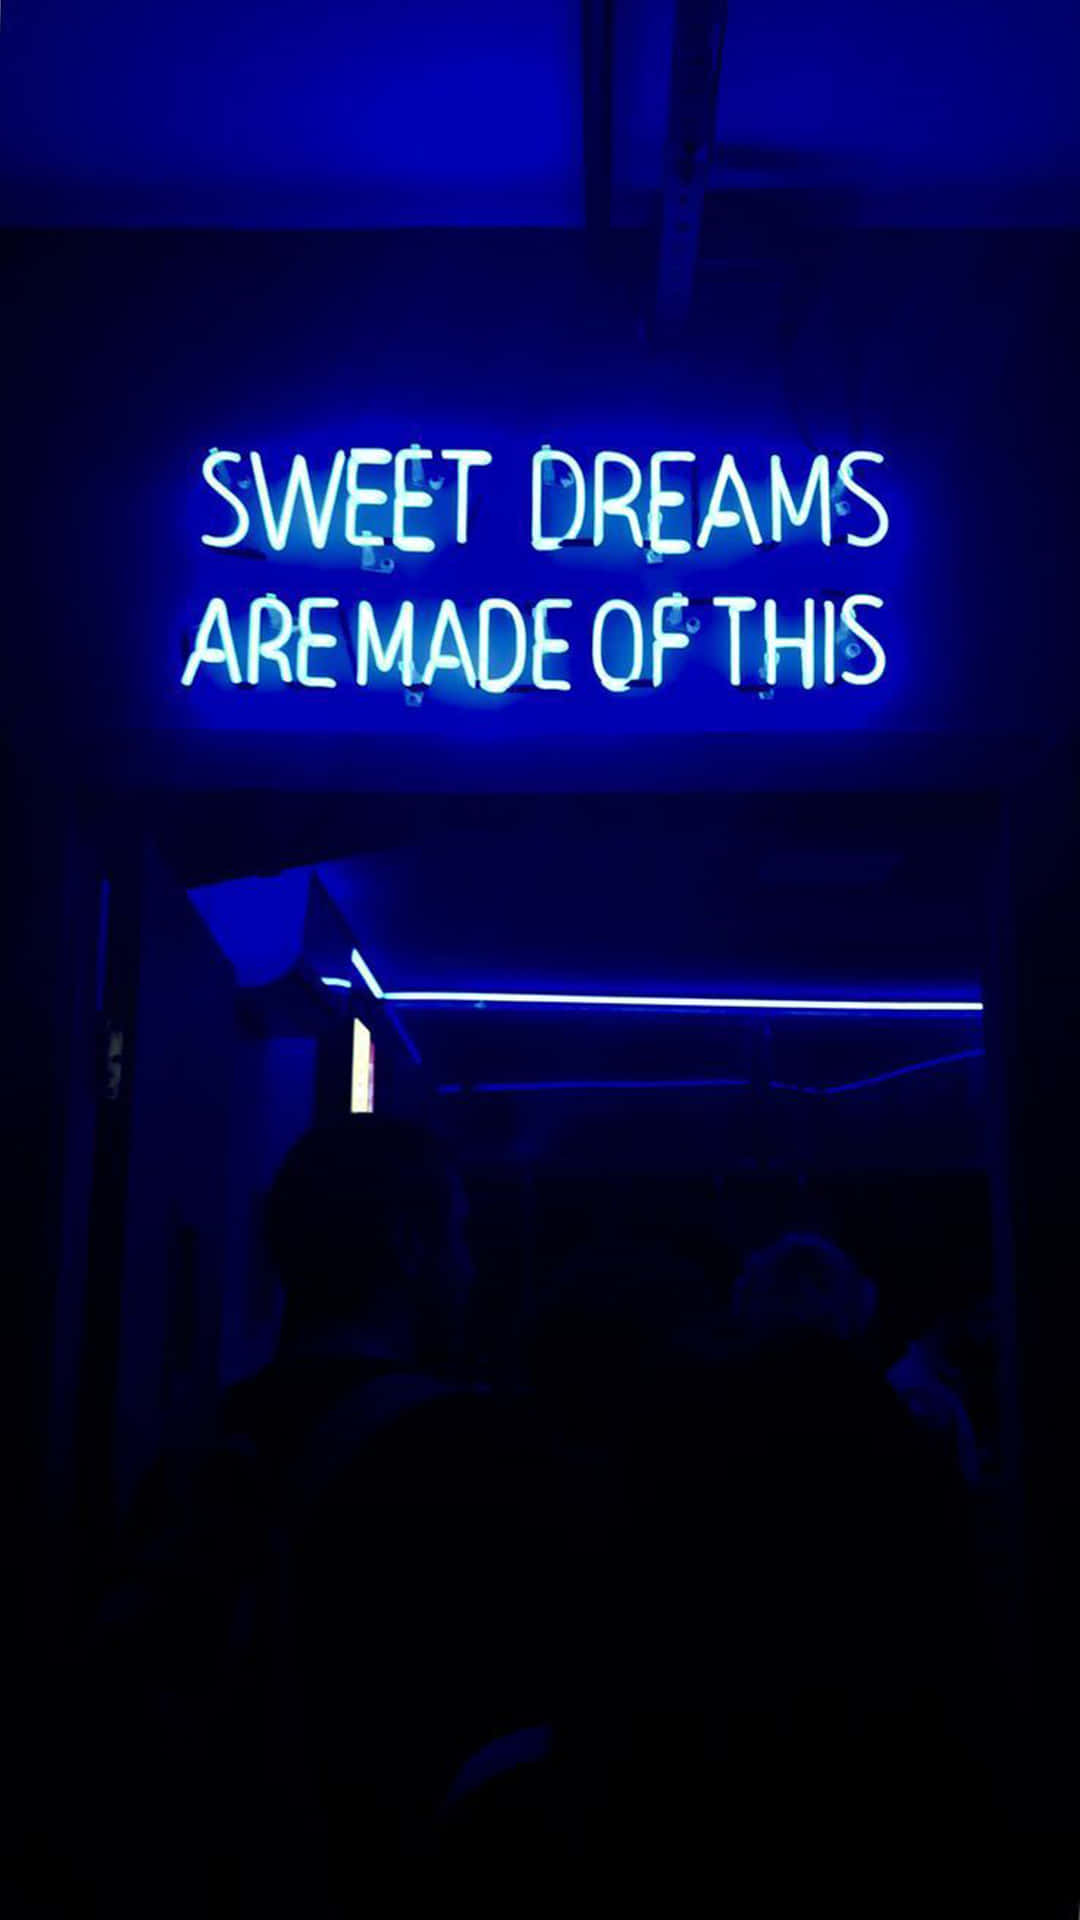 Aesthetic Blue Sweet Dreams Neon Light pictures